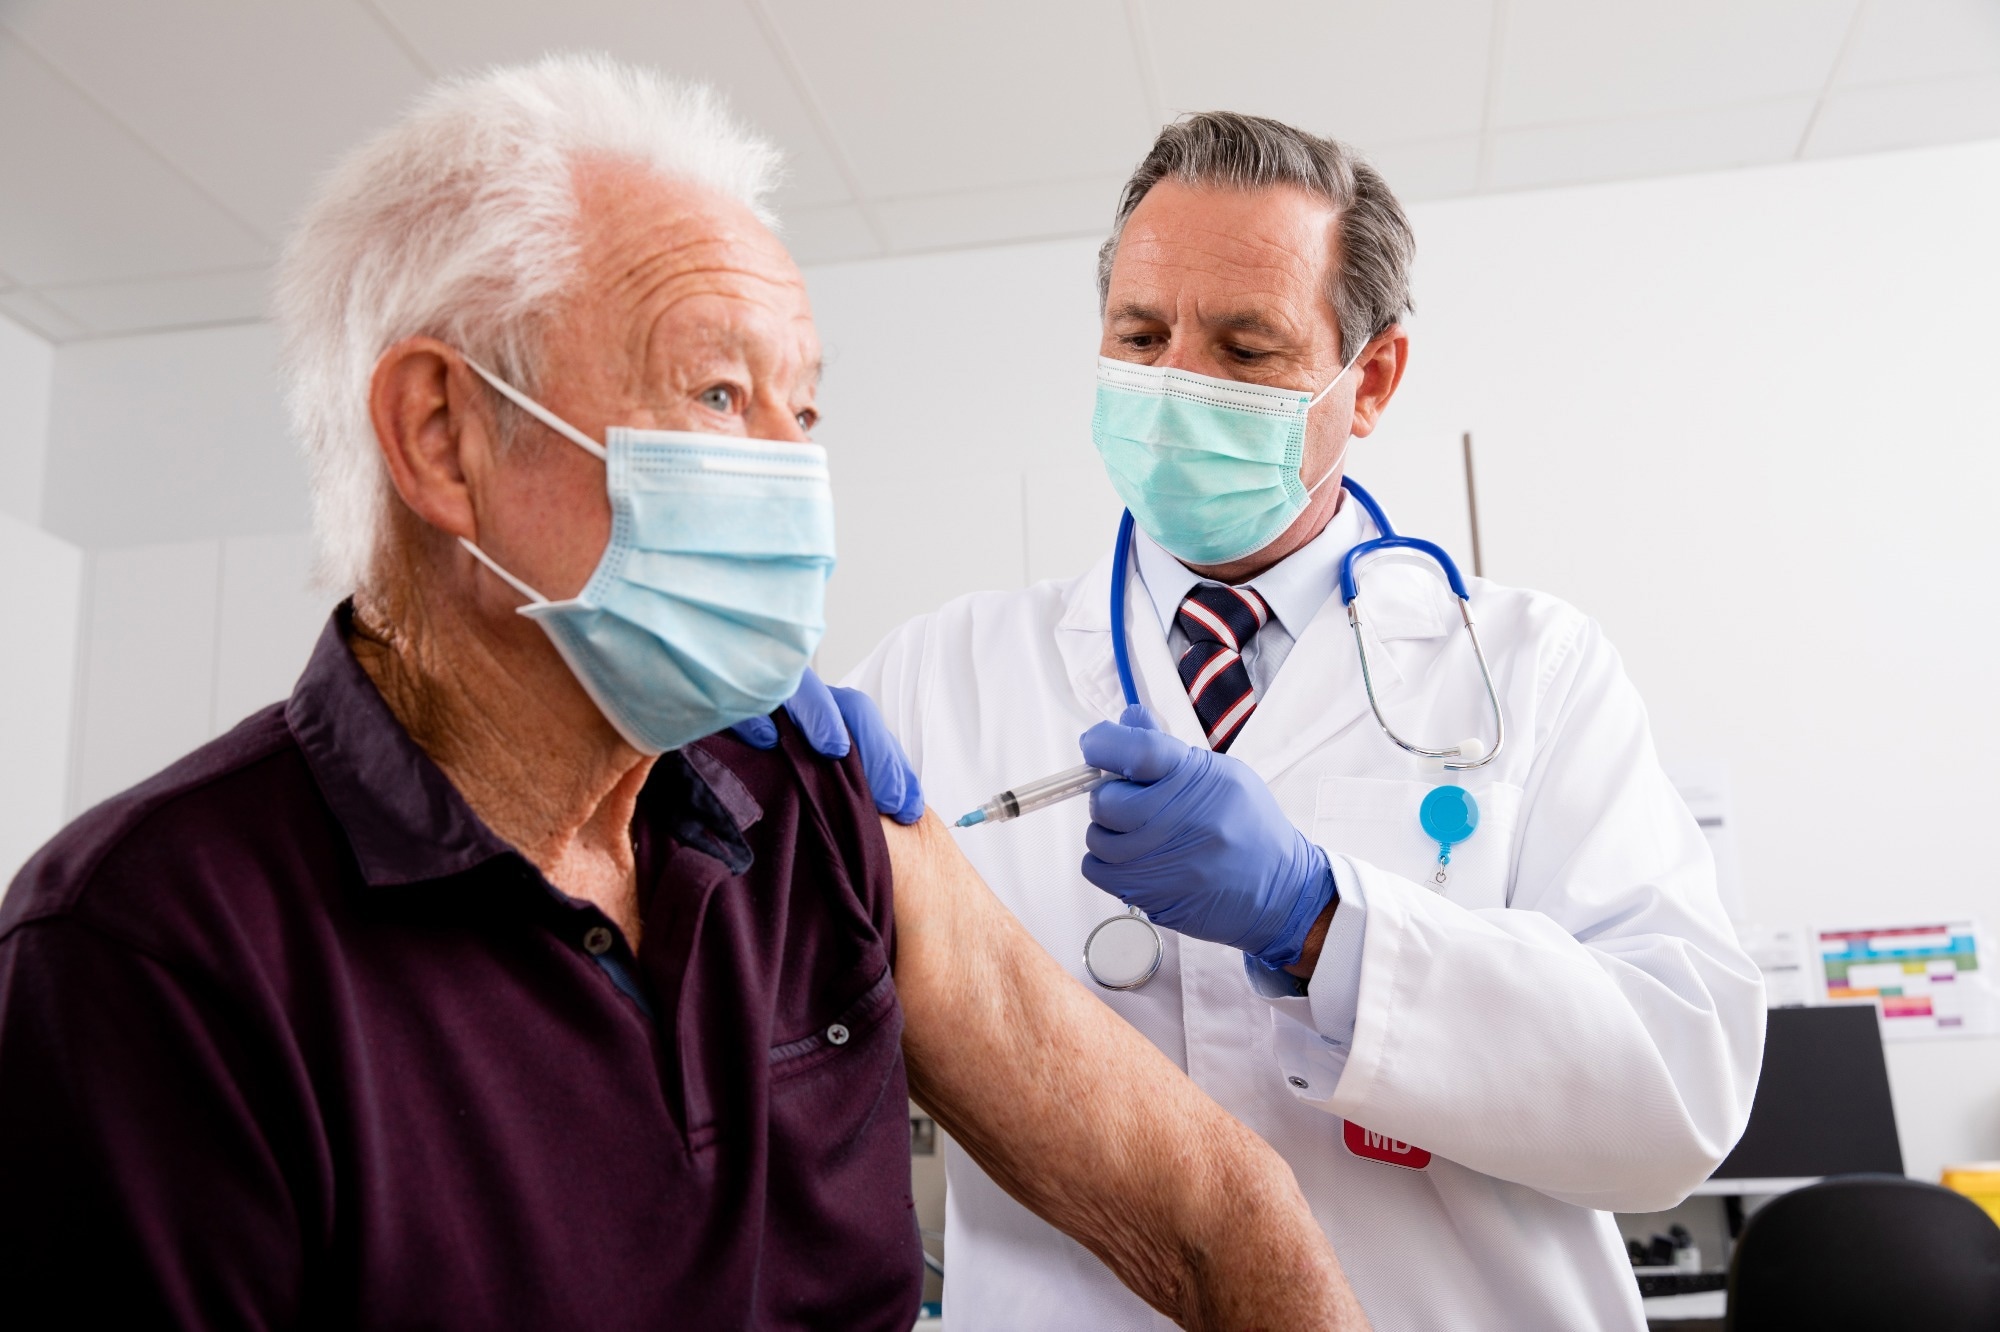 Study: Waning of specific antibodies against Delta and Omicron variants five months after a third dose of BNT162b2 SARS-CoV-2 vaccine in elderly individuals. Image Credit: The Imagineers / Shutterstock